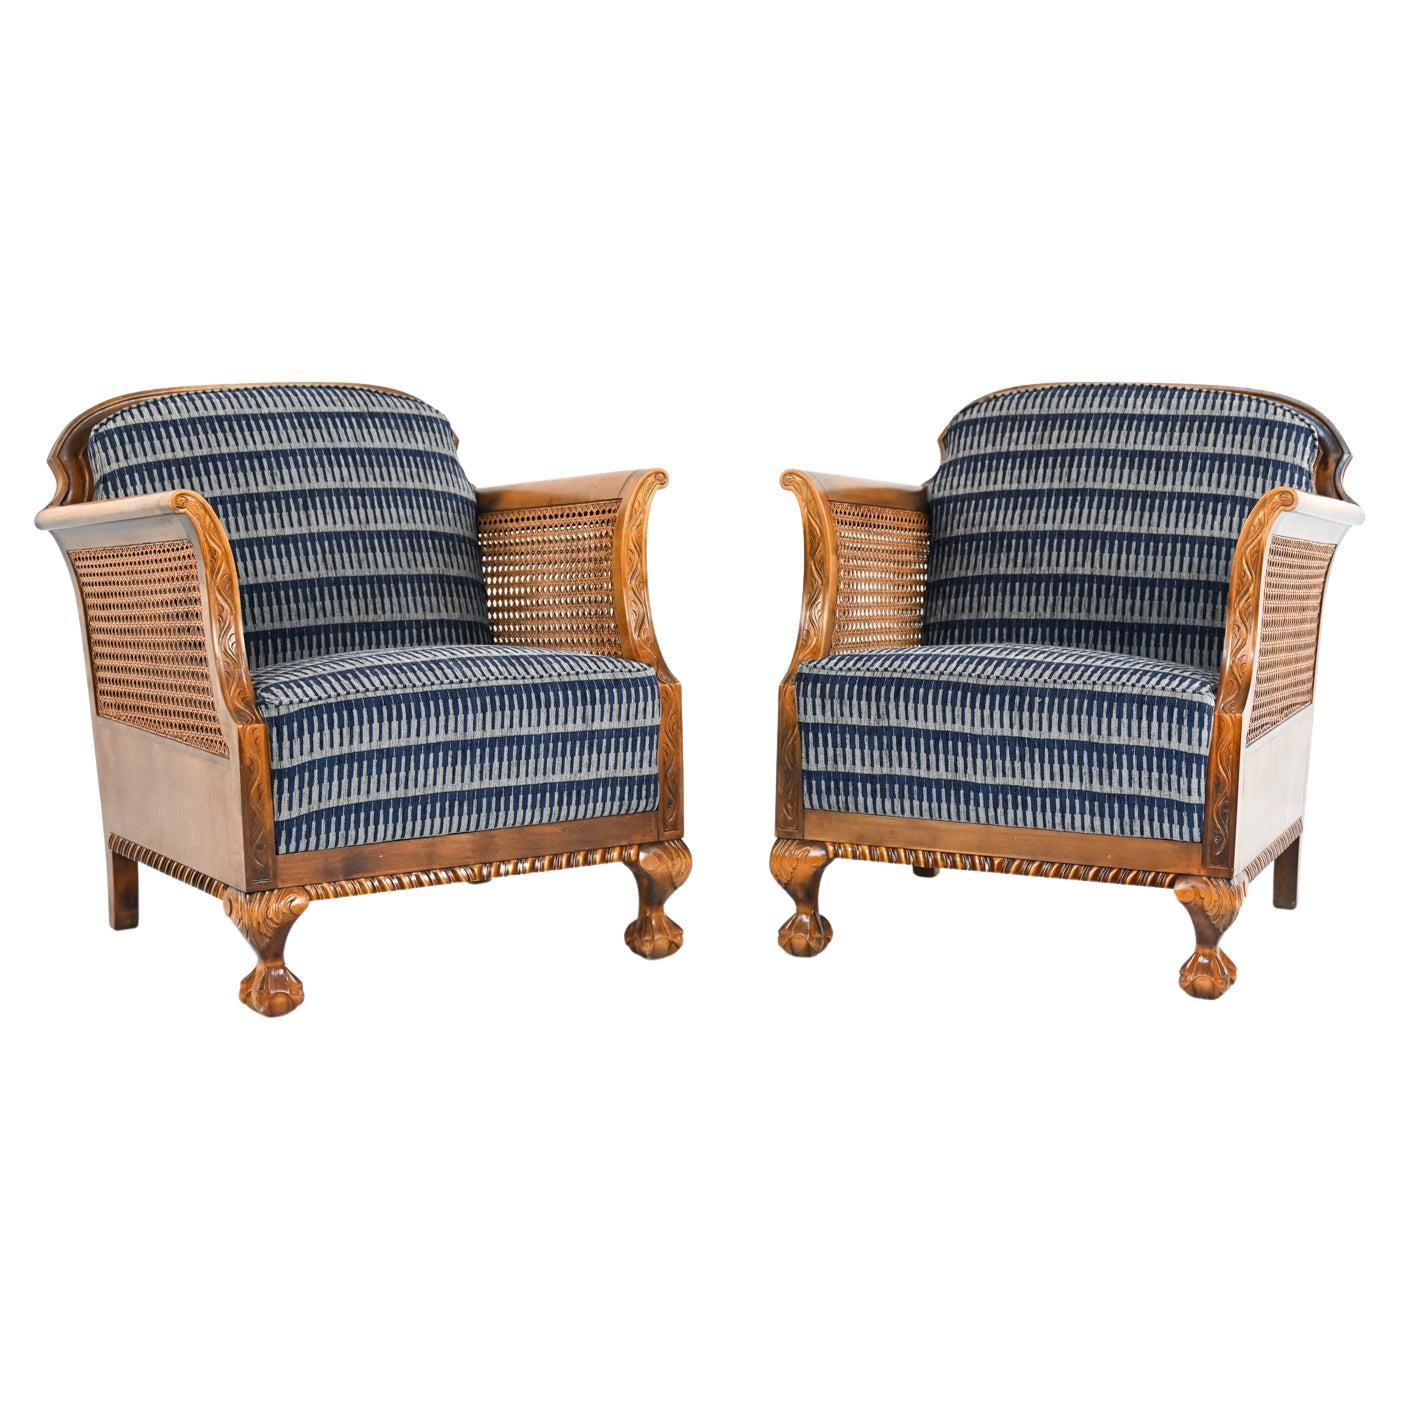 Pair of Early 20th Century French Caned Bergere Chairs